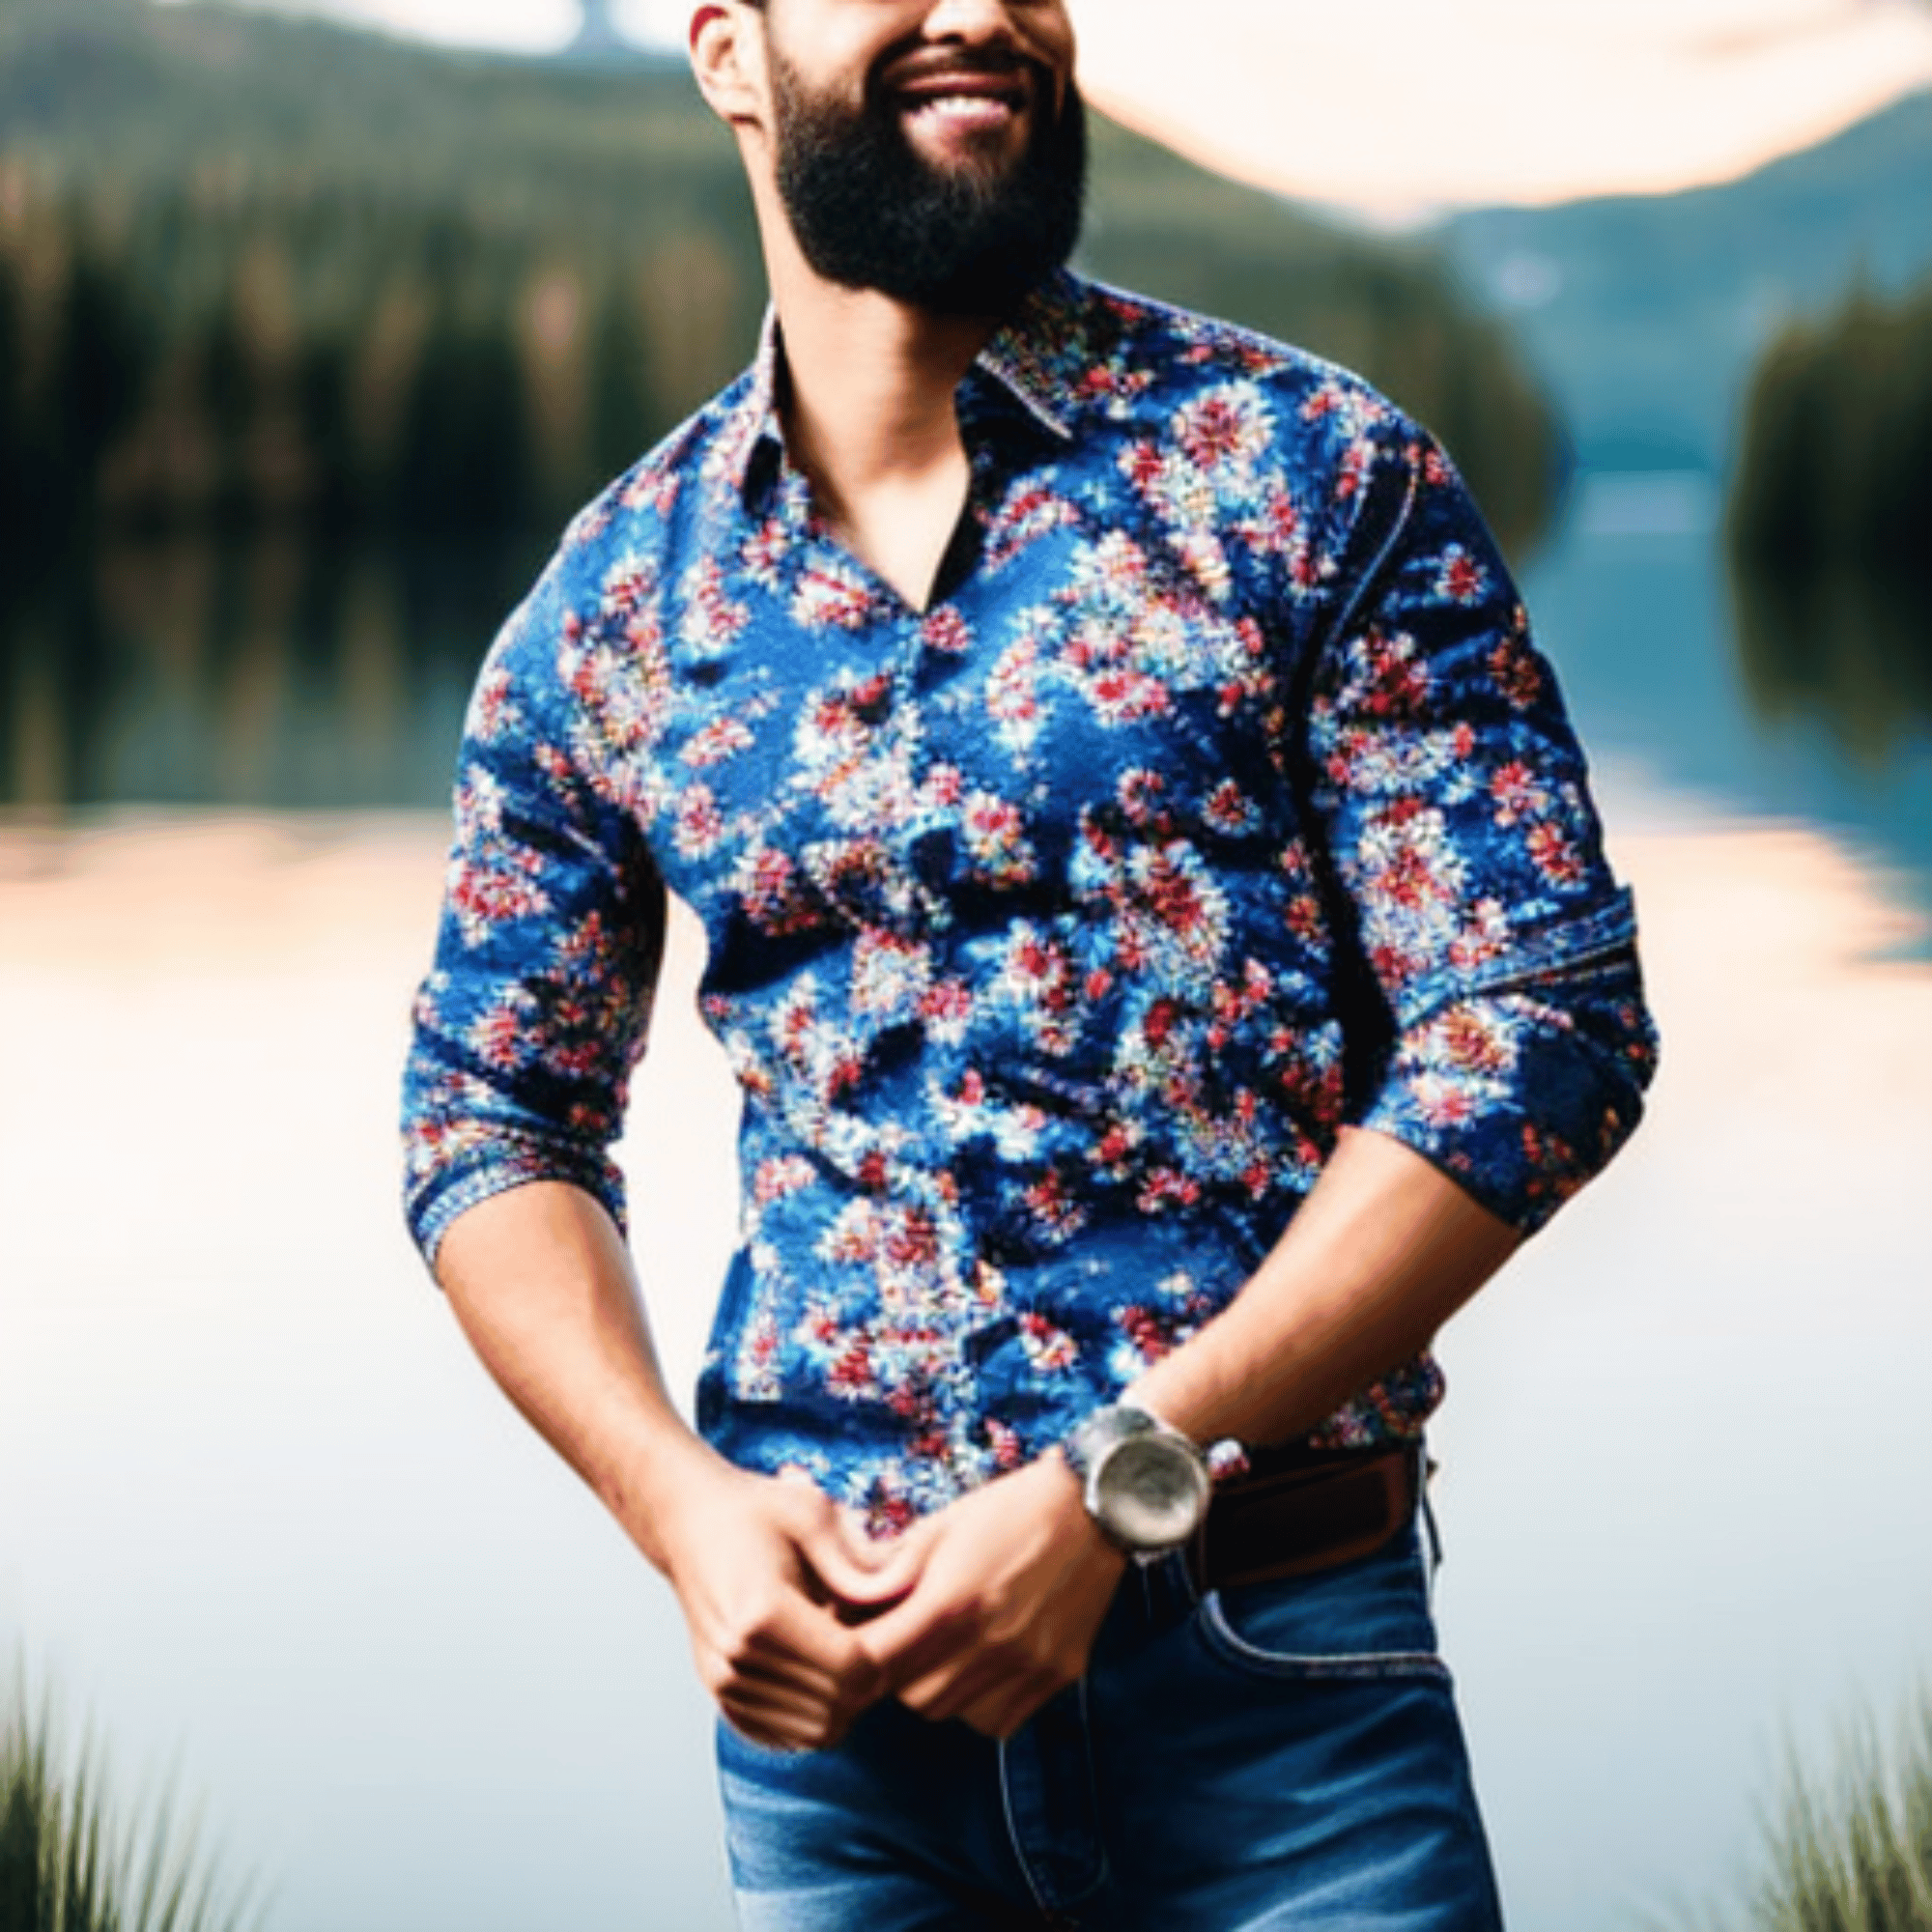 A man wearing a floral print shirt and jeans